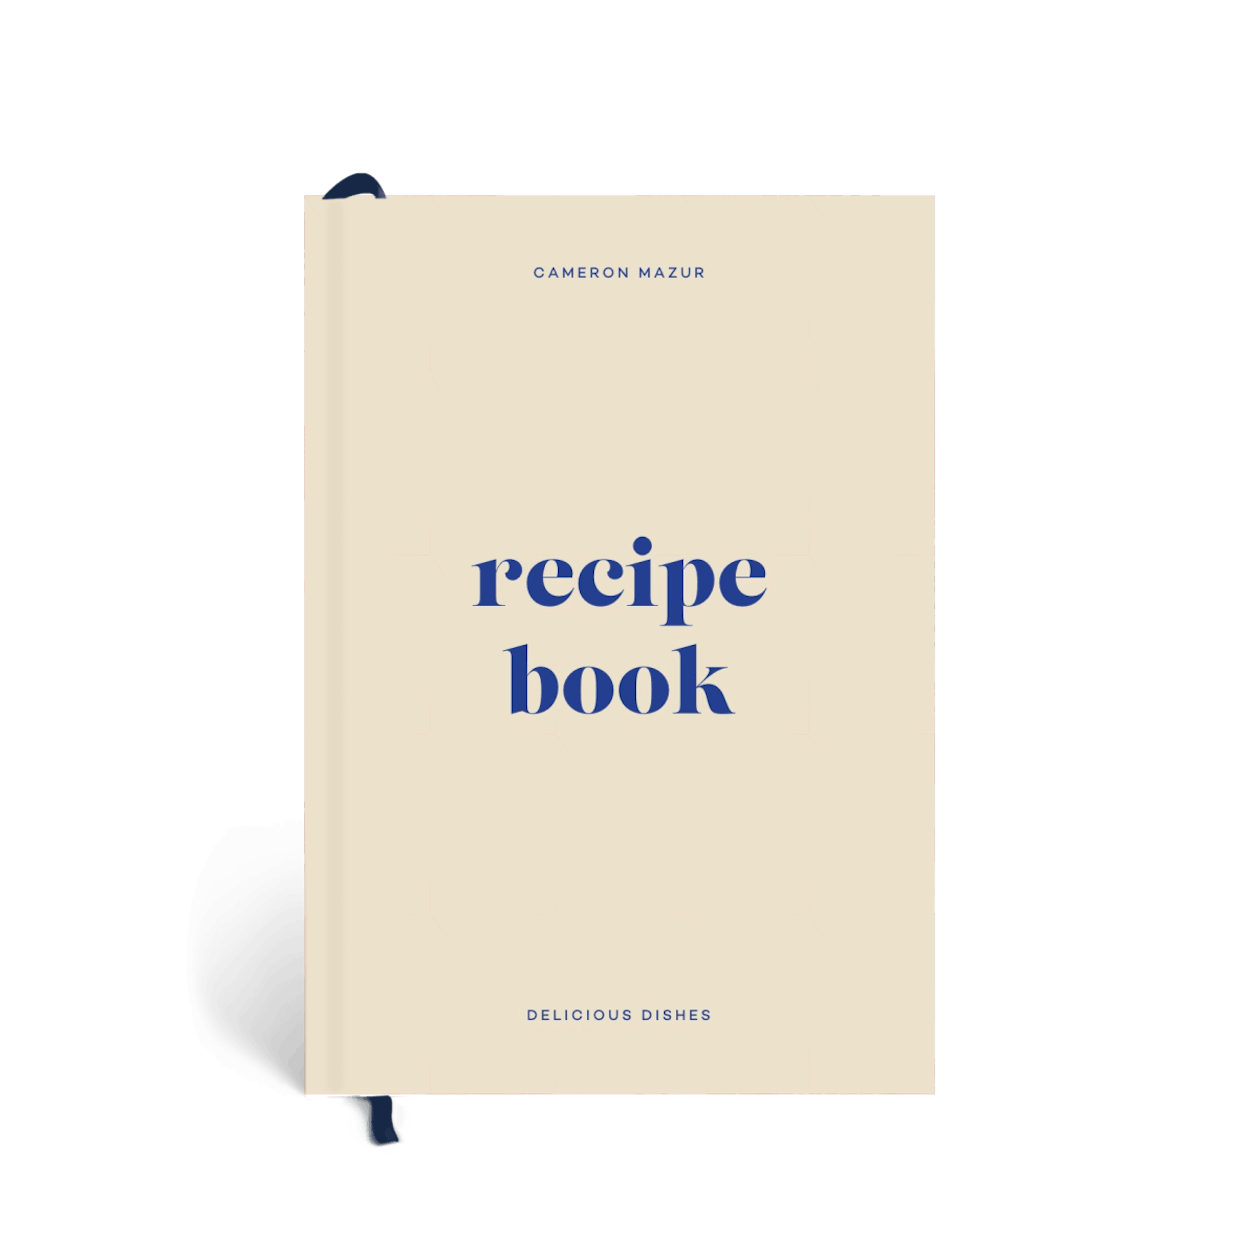 off white hard cover book that reads the recipe book in blue text